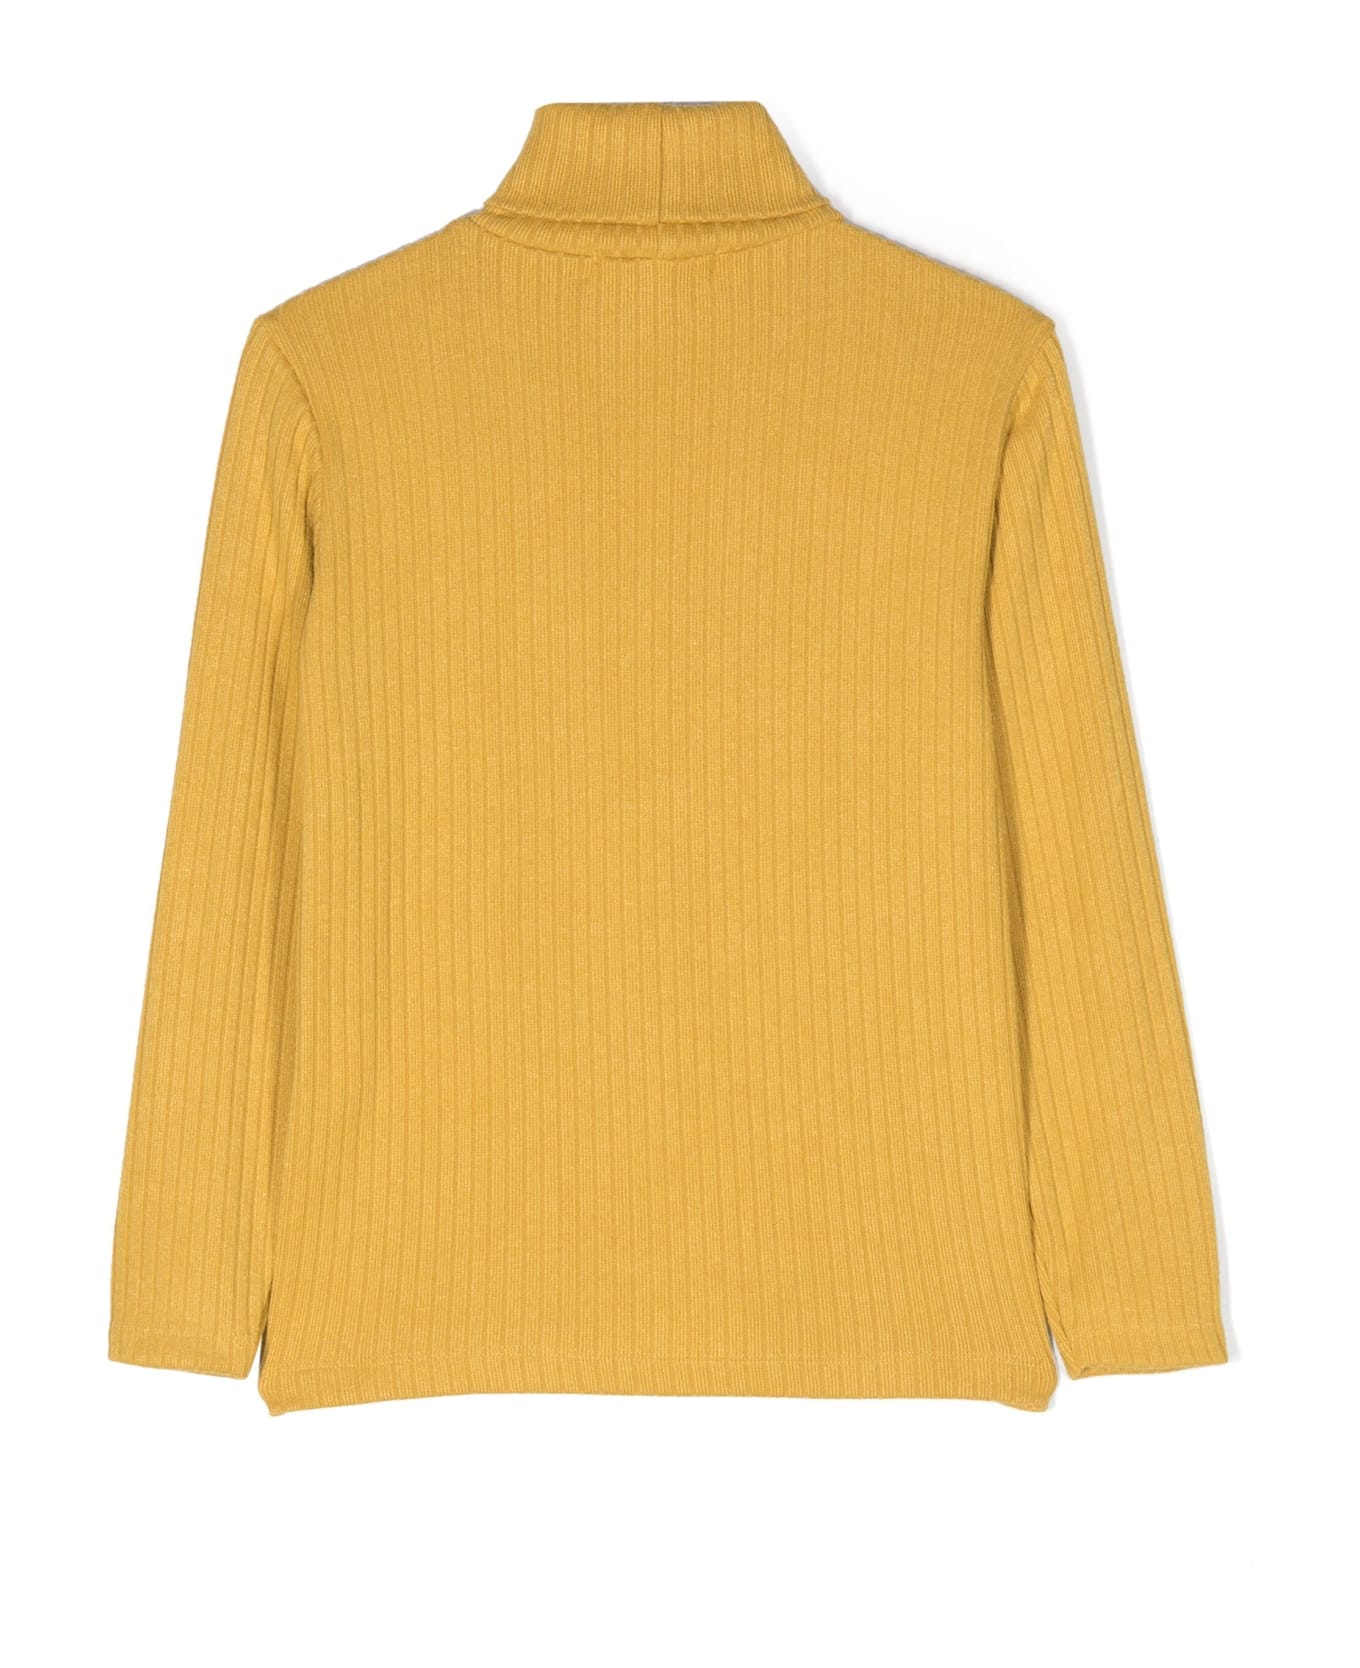 Manuel Ritz Turtleneck Sweater With Patch - Yellow